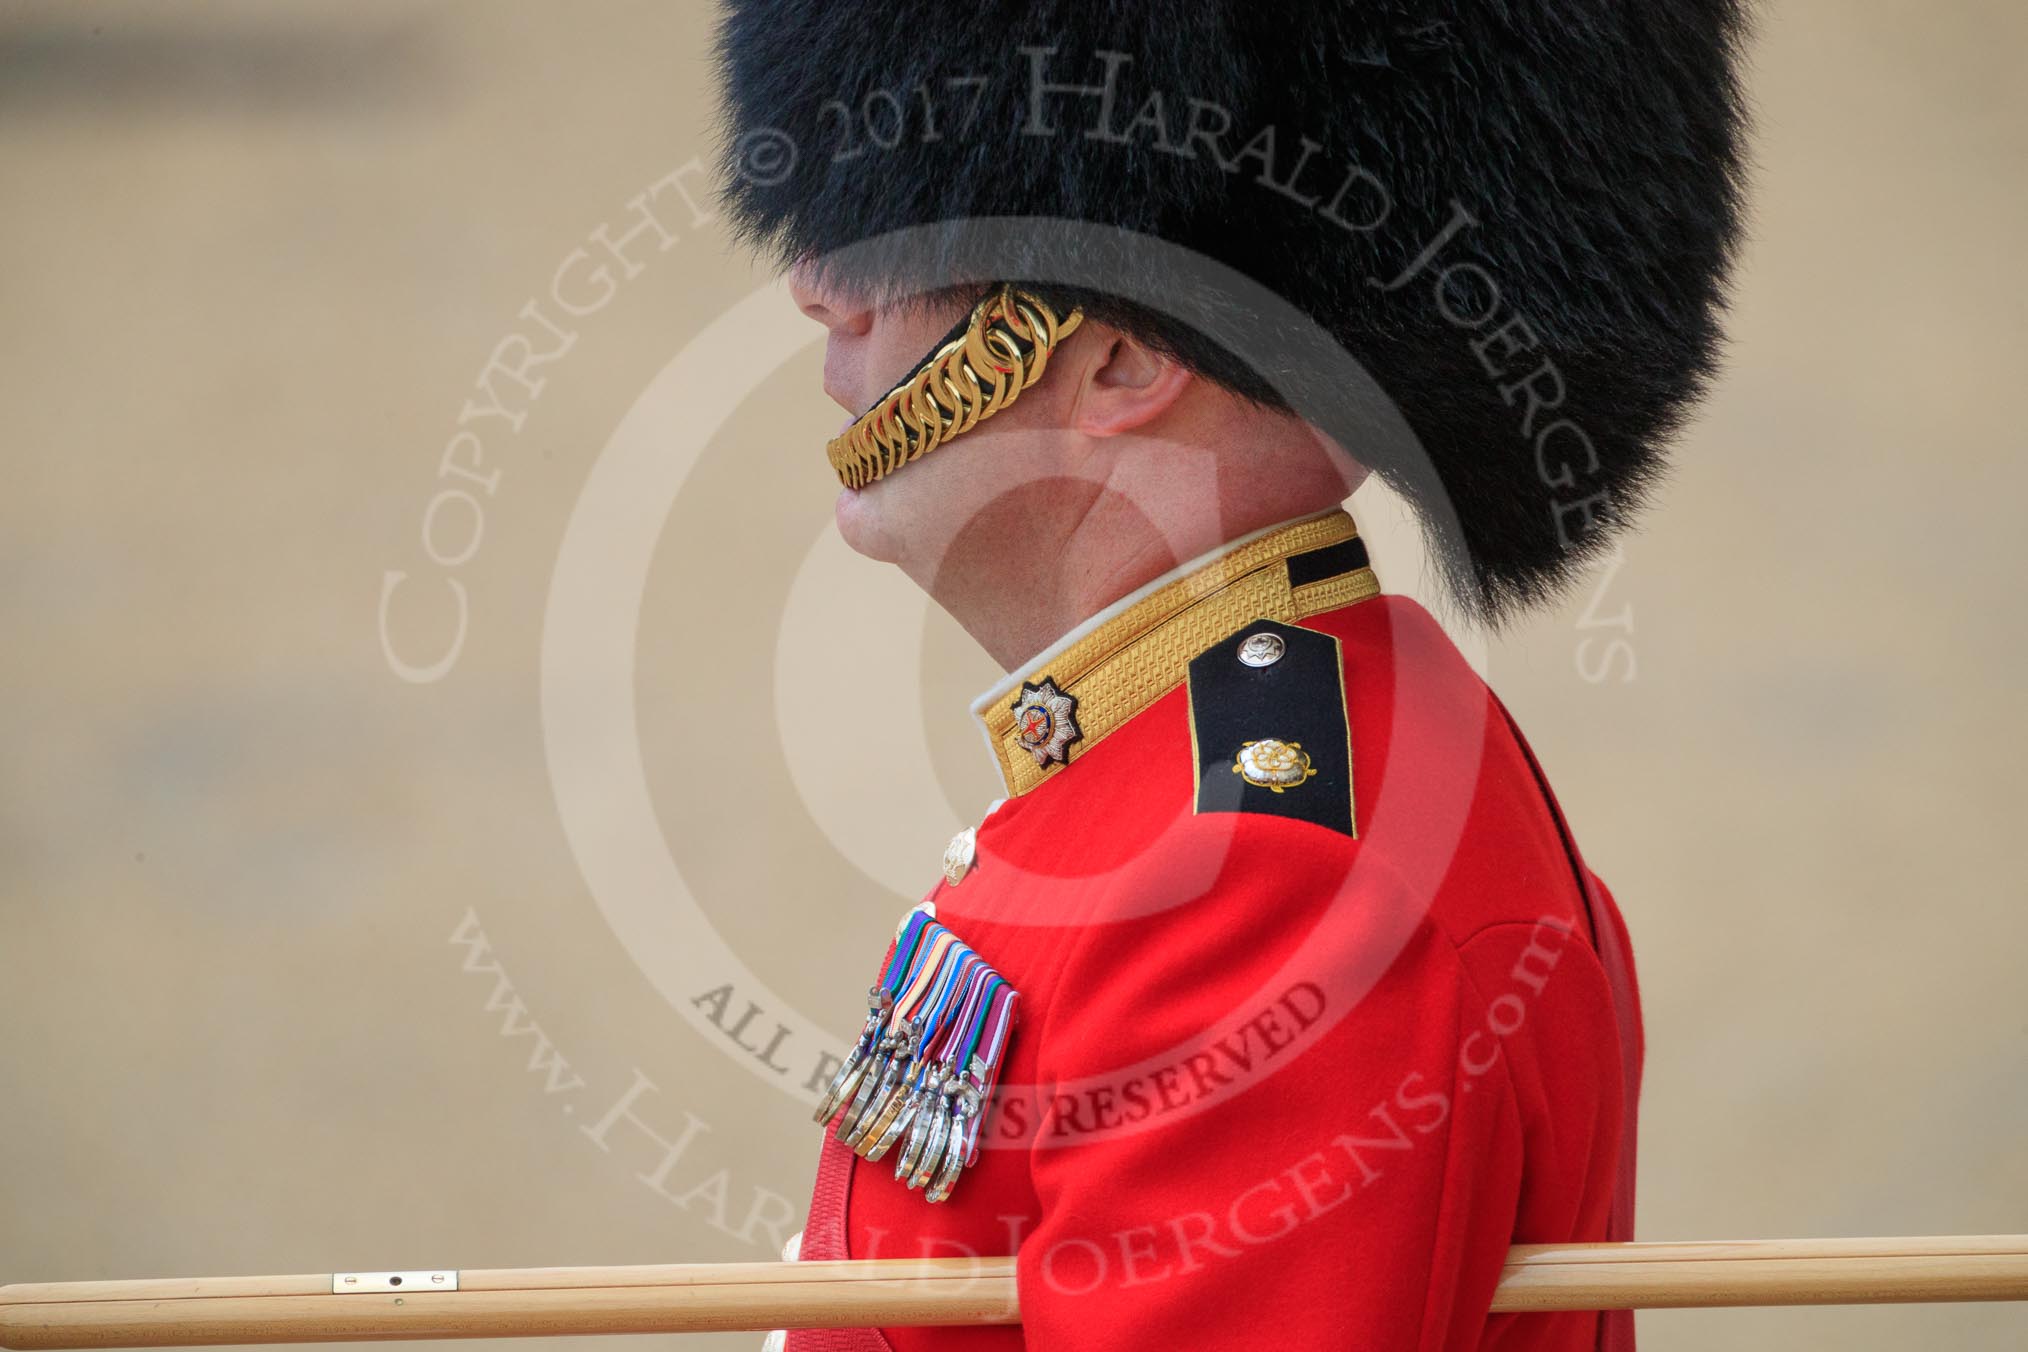 during The Colonel's Review {iptcyear4} (final rehearsal for Trooping the Colour, The Queen's Birthday Parade)  at Horse Guards Parade, Westminster, London, 2 June 2018, 10:43.